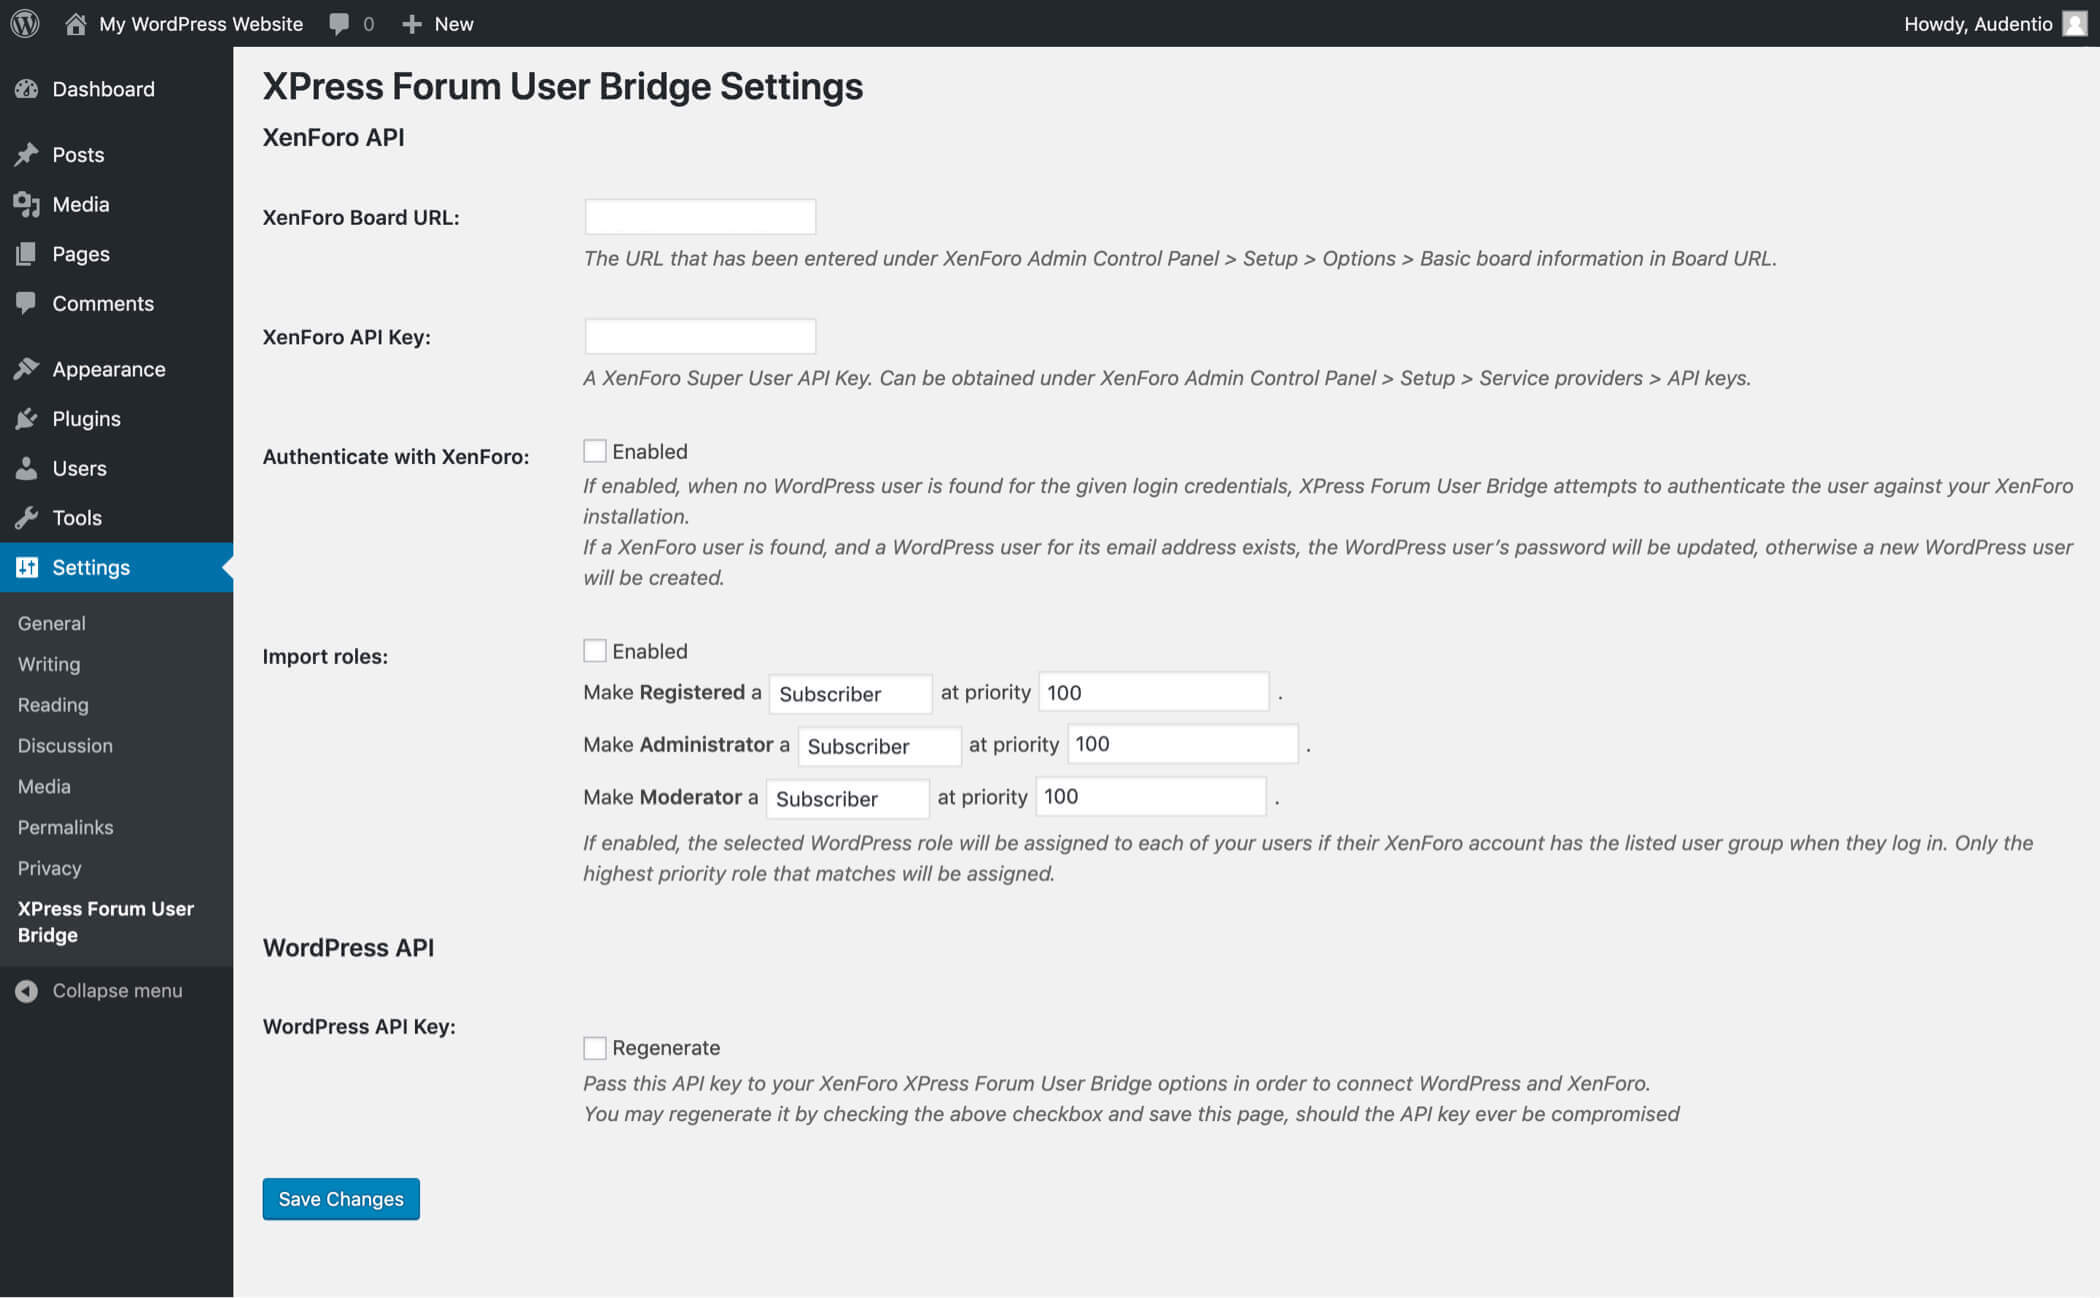 Screenshot of the options section for XPress Forum User Bridge within WordPress under the Settings section.